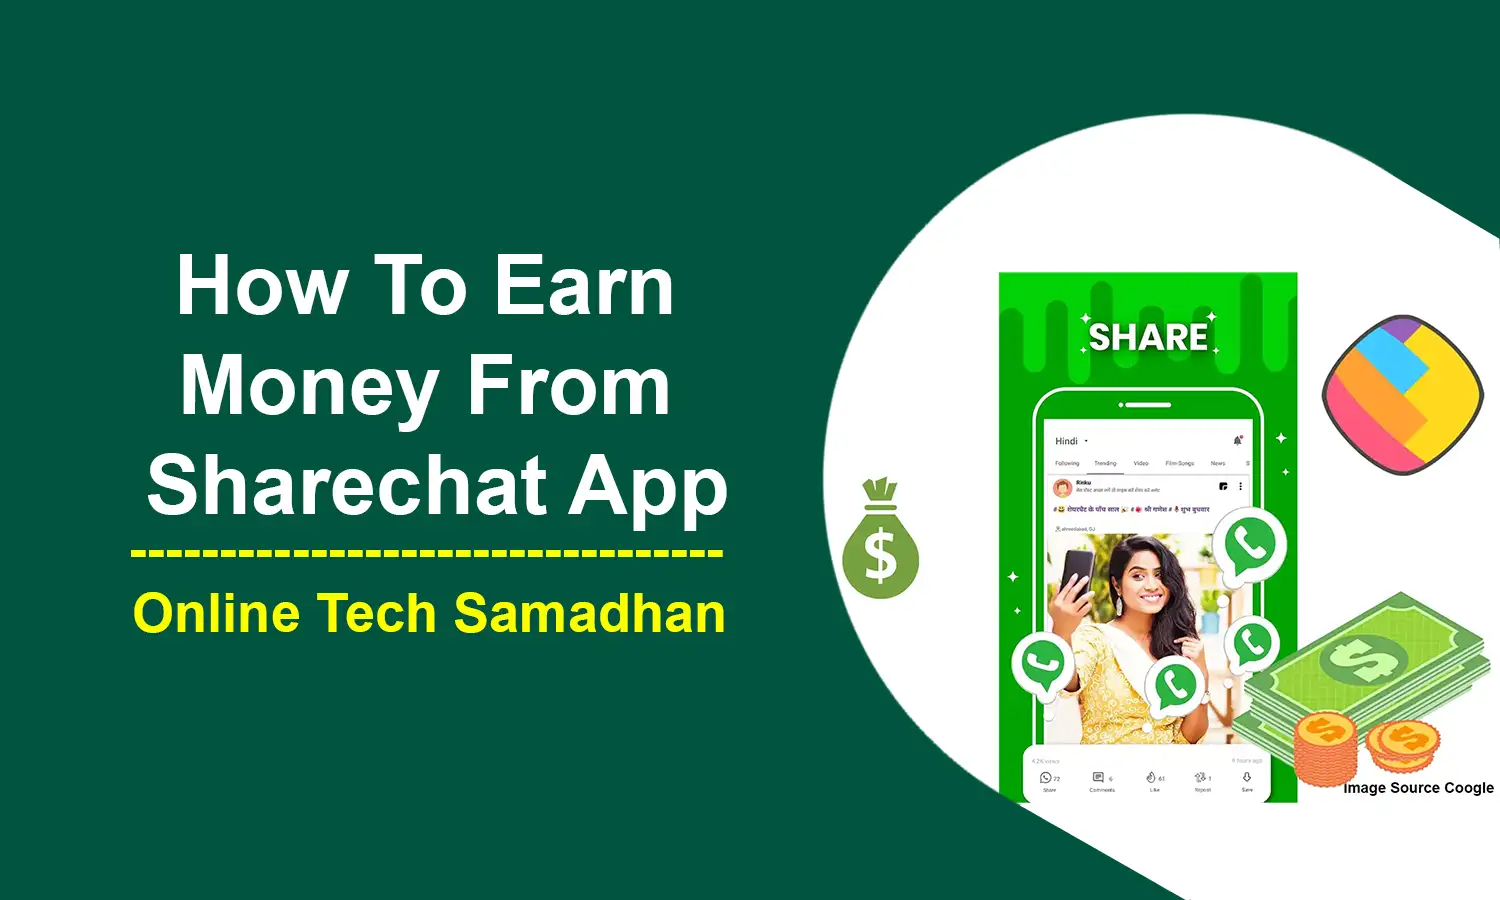 How To Earn Money From Sharechat App